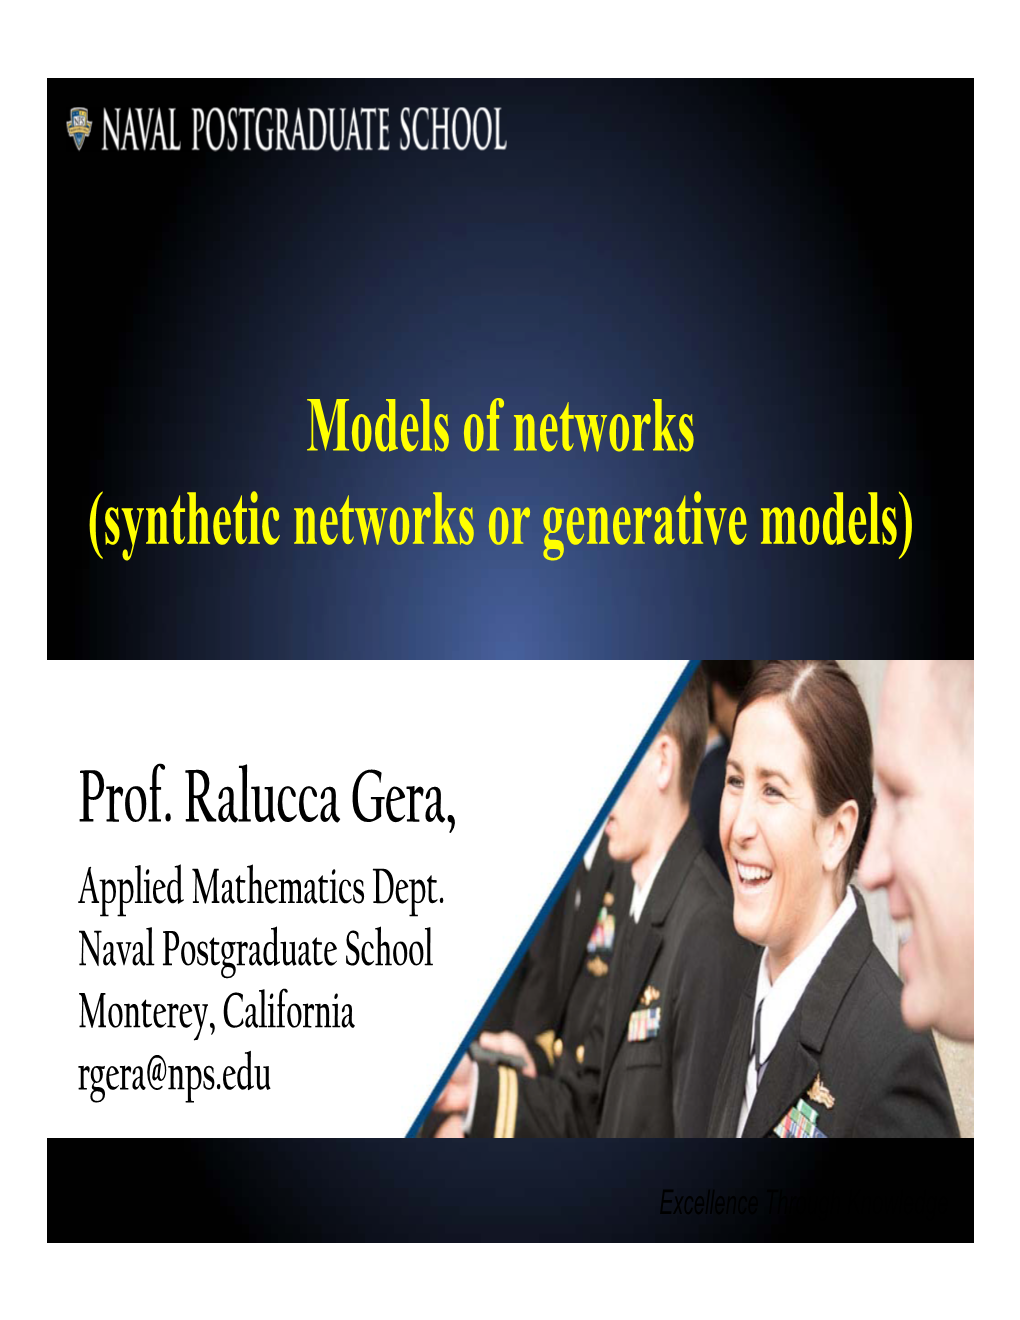 (Synthetic Networks Or Generative Models) Prof. Ralucca Gera